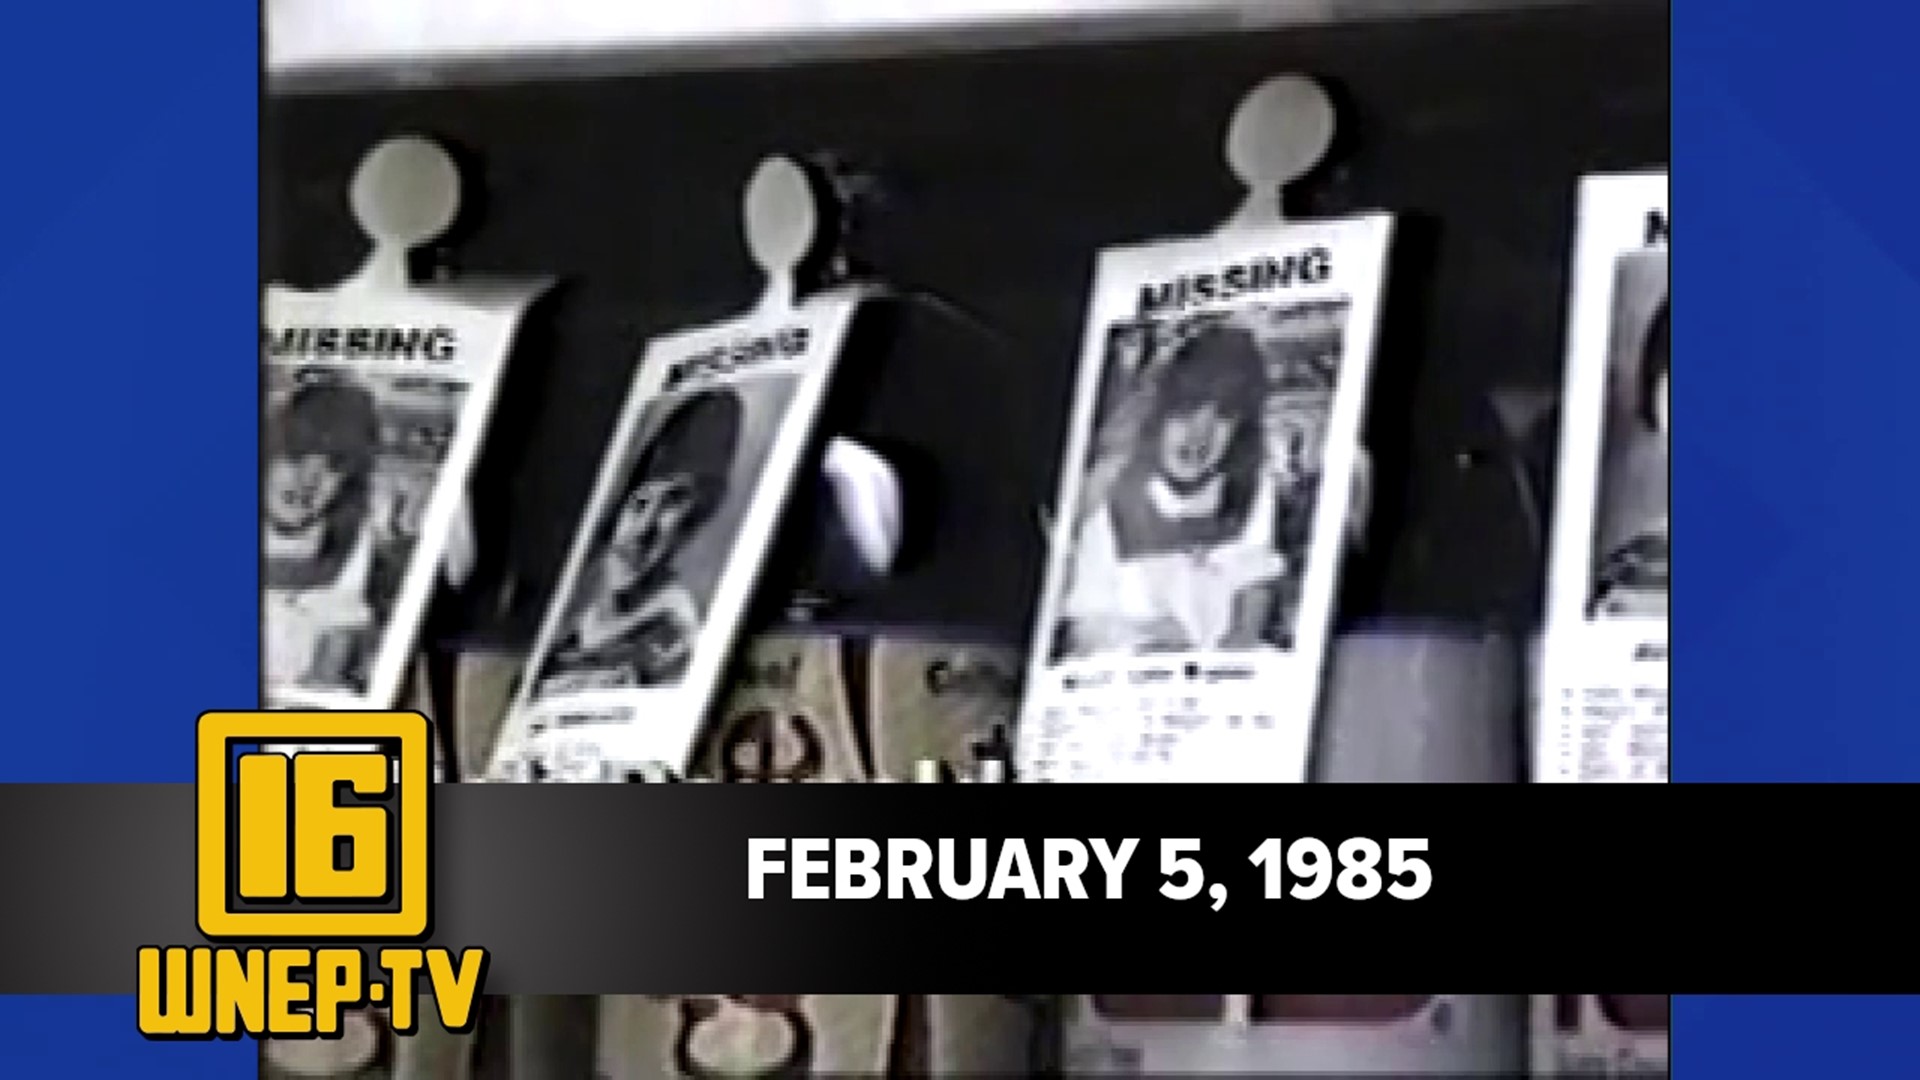 Join Karen Harch and Nolan Johannes with curated stories from February 5, 1985.